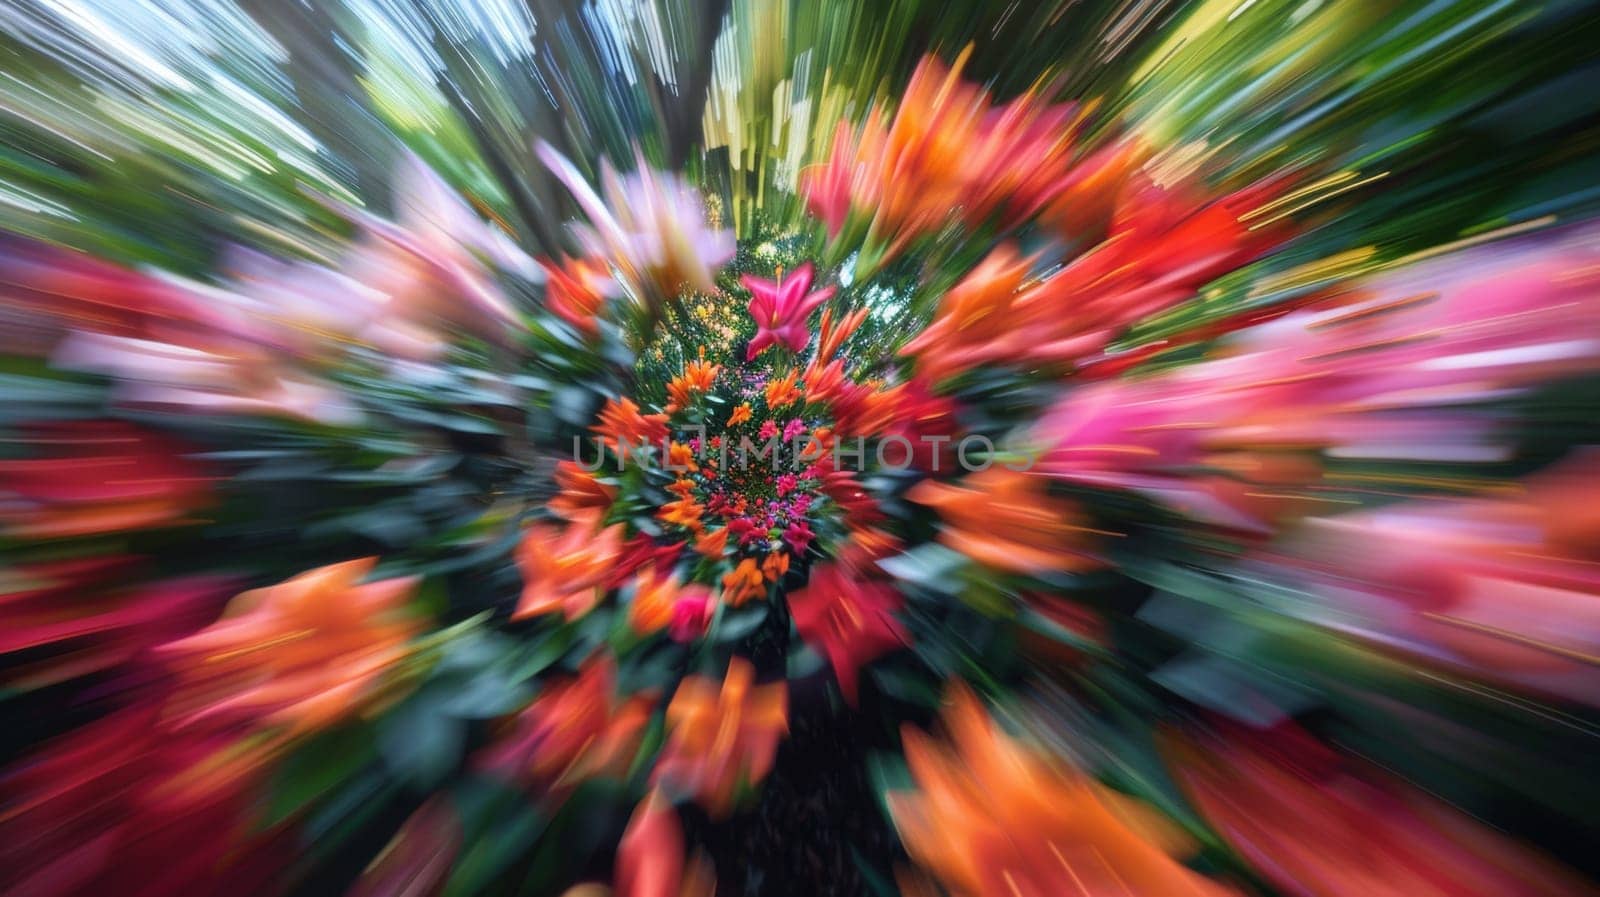 A blurry picture of a bunch of flowers in the air